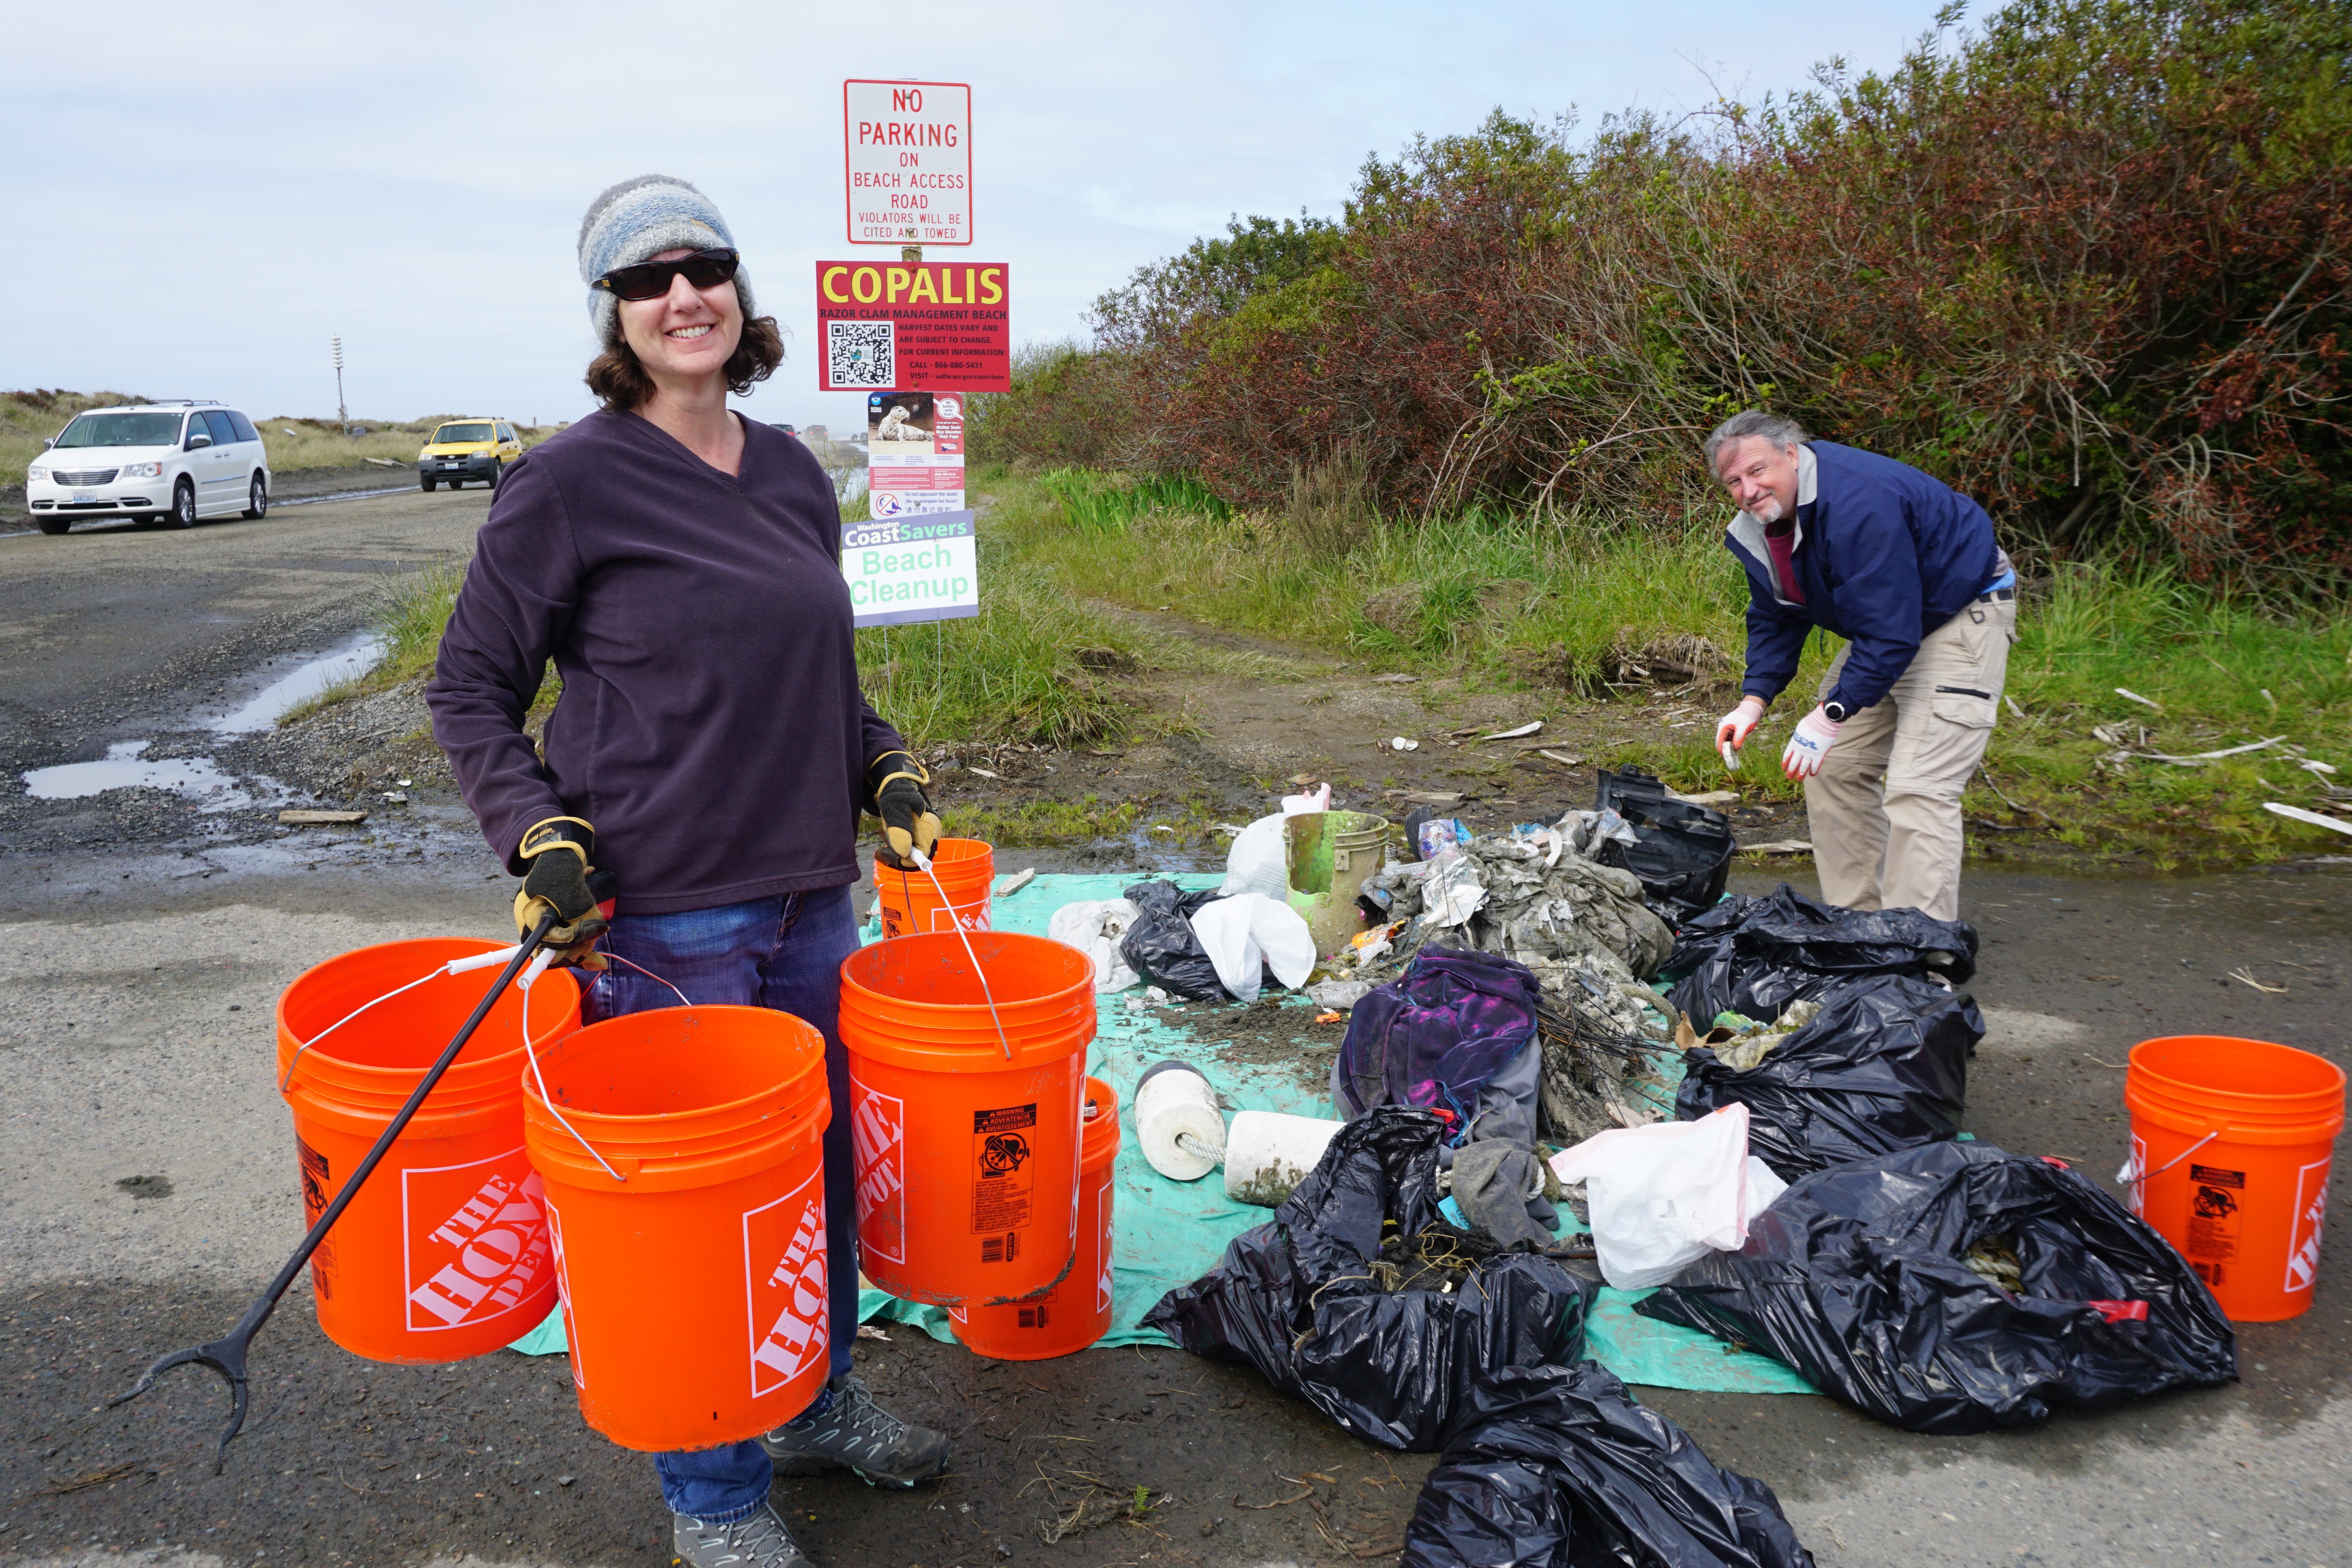 A man sorts trash into bags while a woman carries three orange buckets full of debris off the beach